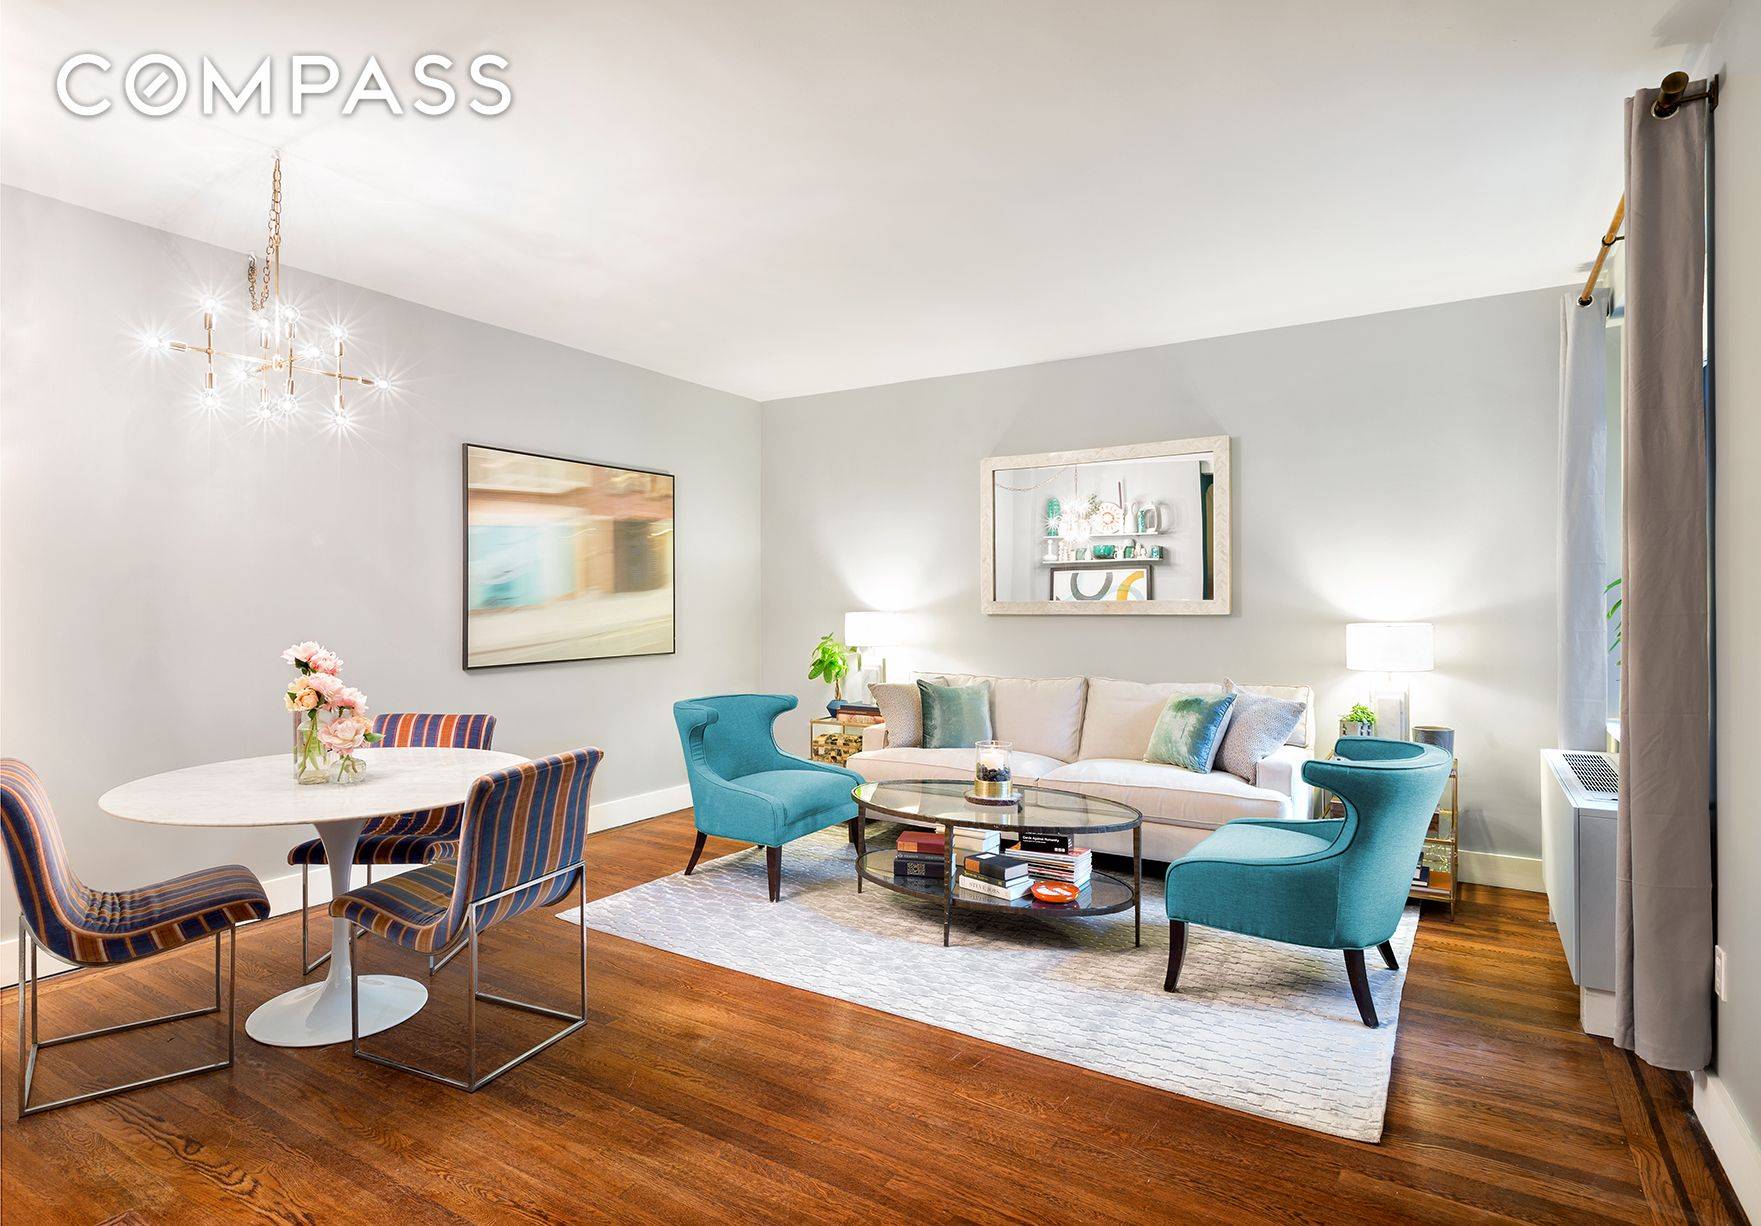 Chelsea Luxury Stunning, Gut Renovated 1BD 1BA in the heart of Chelsea, Elevator Building, S S appliances, W D in unit, D W, 24hr Doorman, Landscaped Roof Deck, Elevator Building, ...